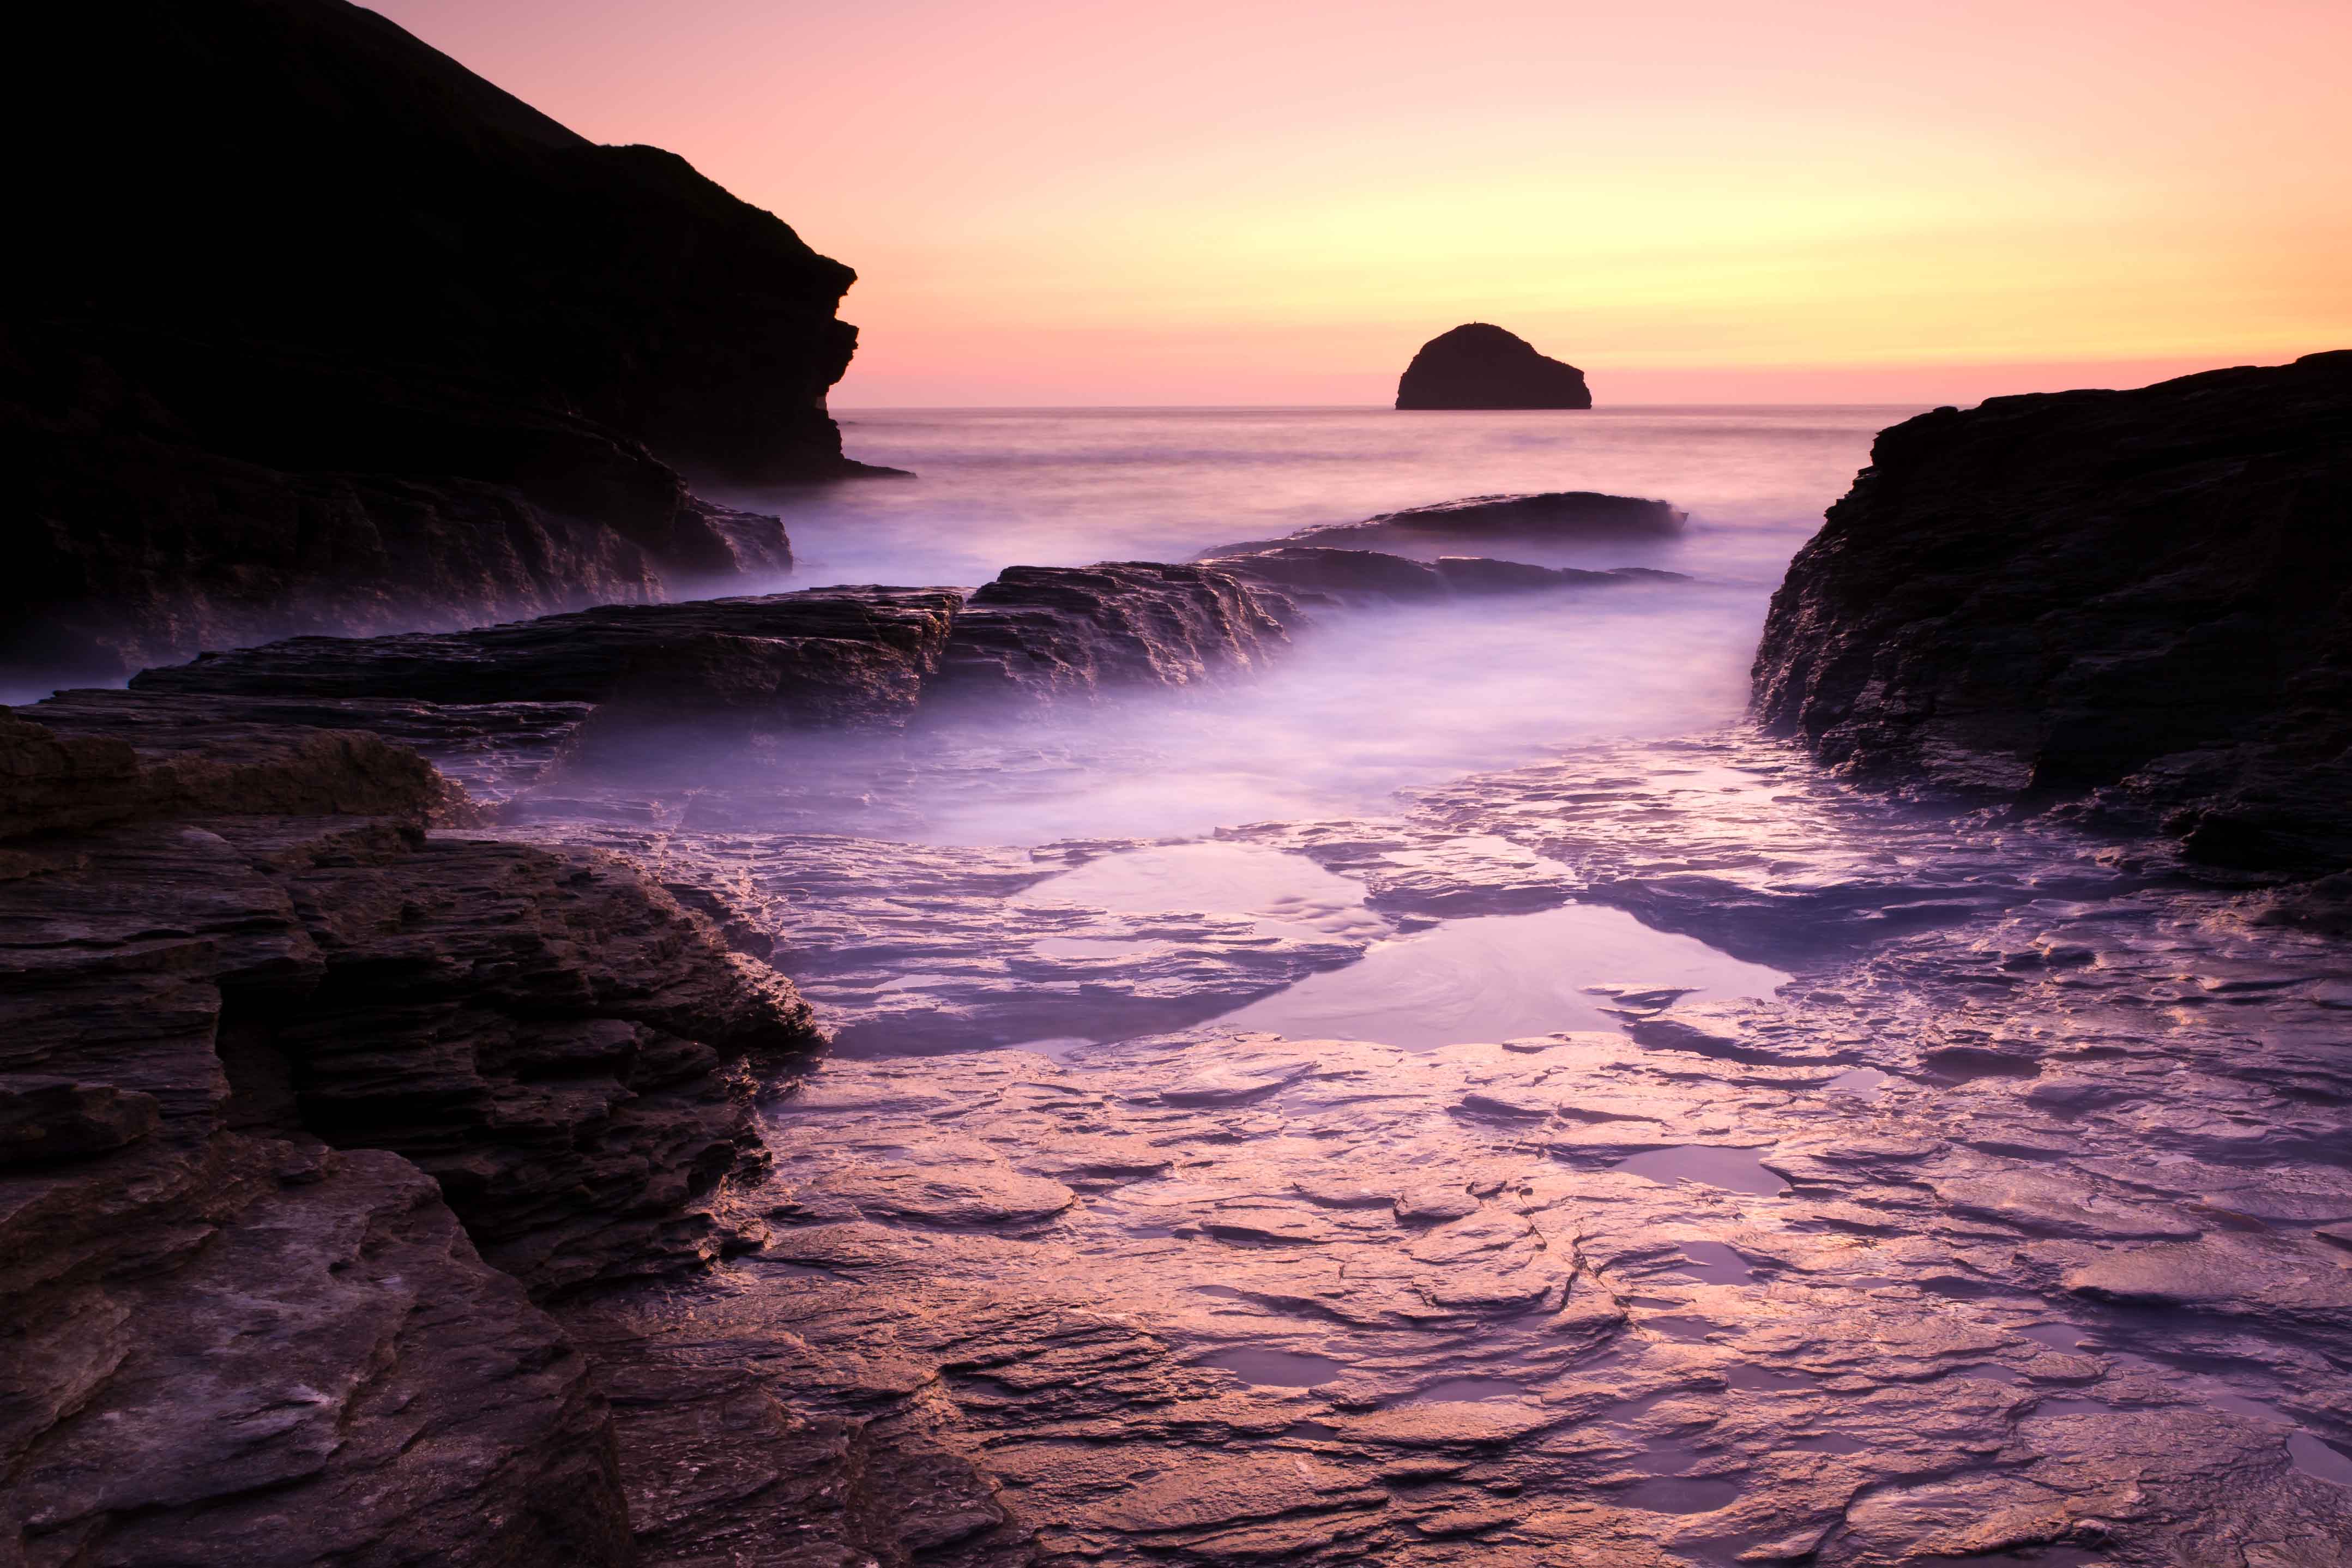 Top 5 spots to see the sunset in Cornwall